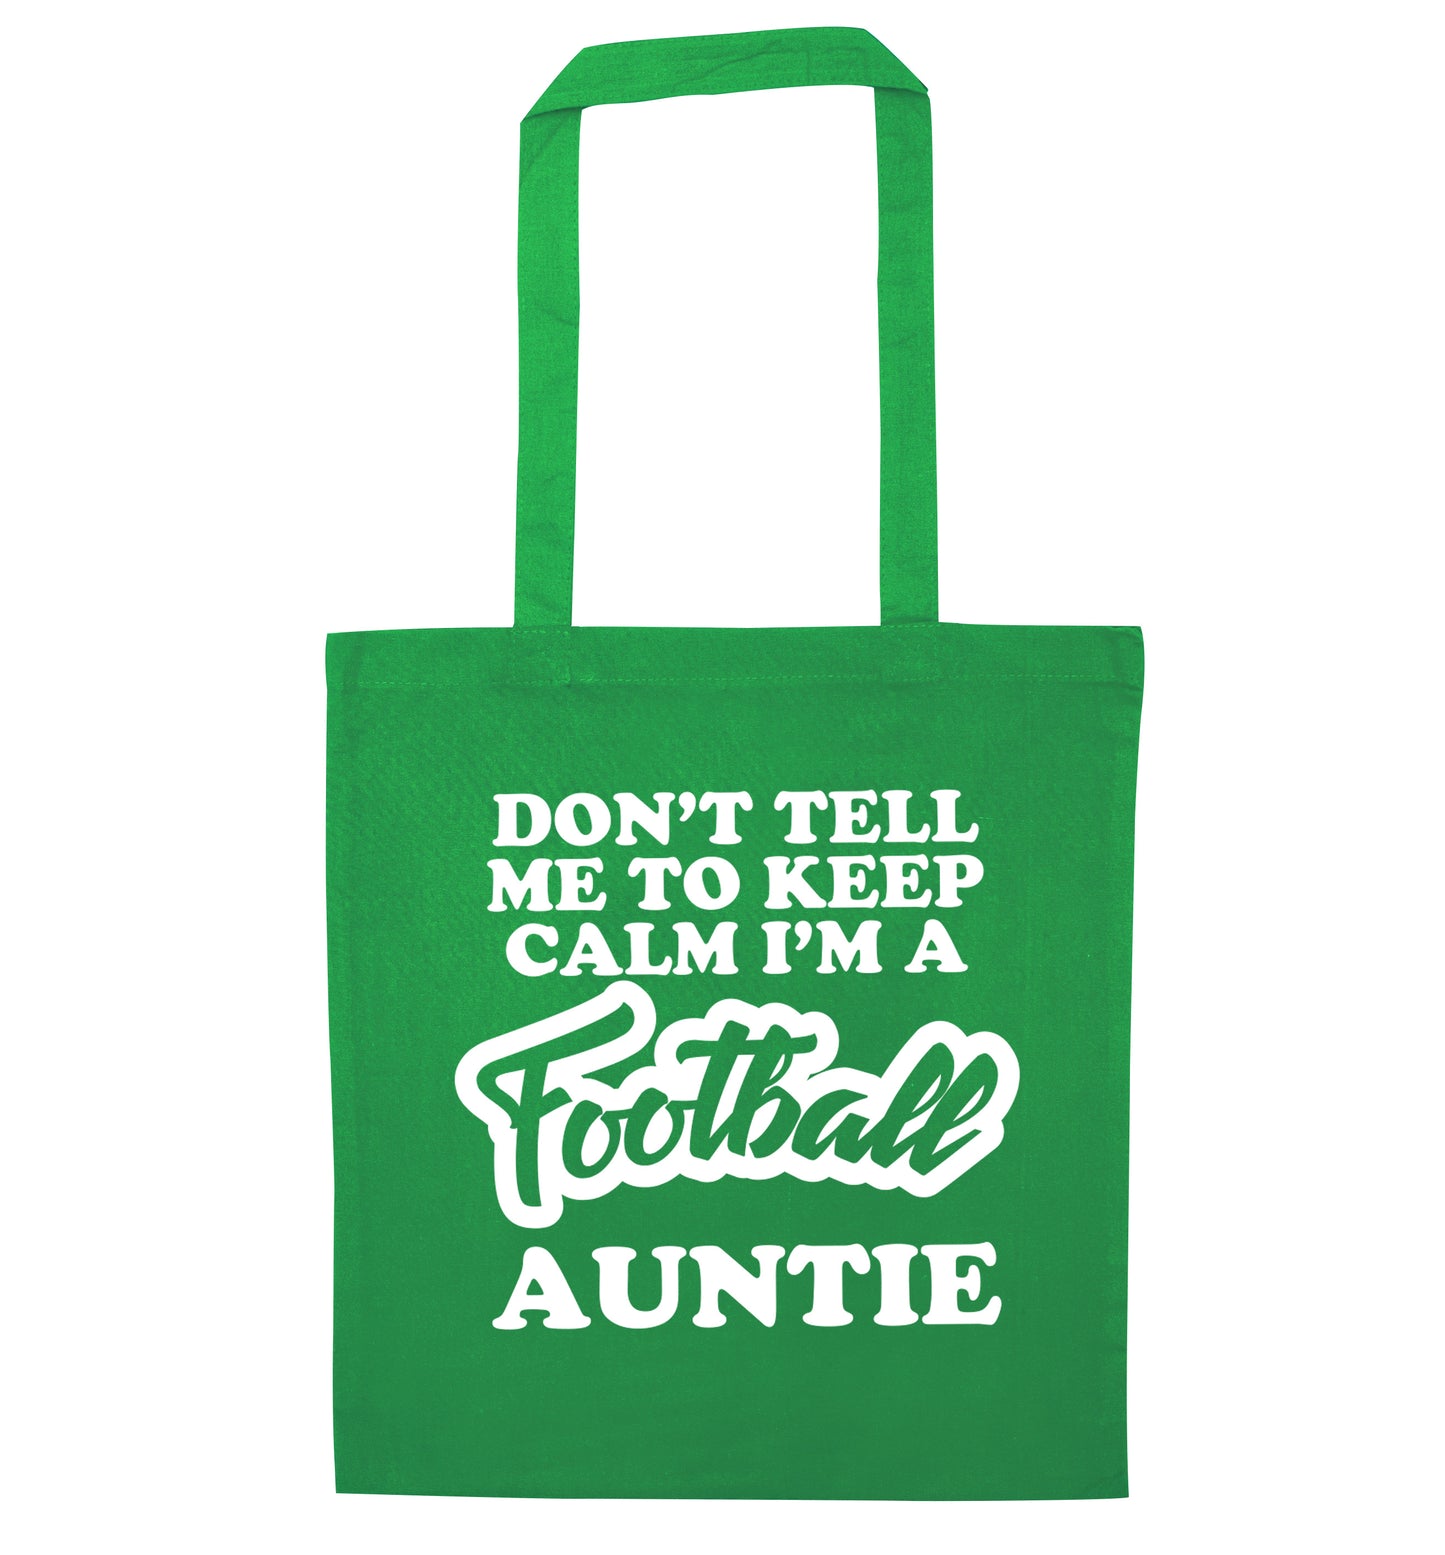 Don't tell me to keep calm I'm a football auntie green tote bag